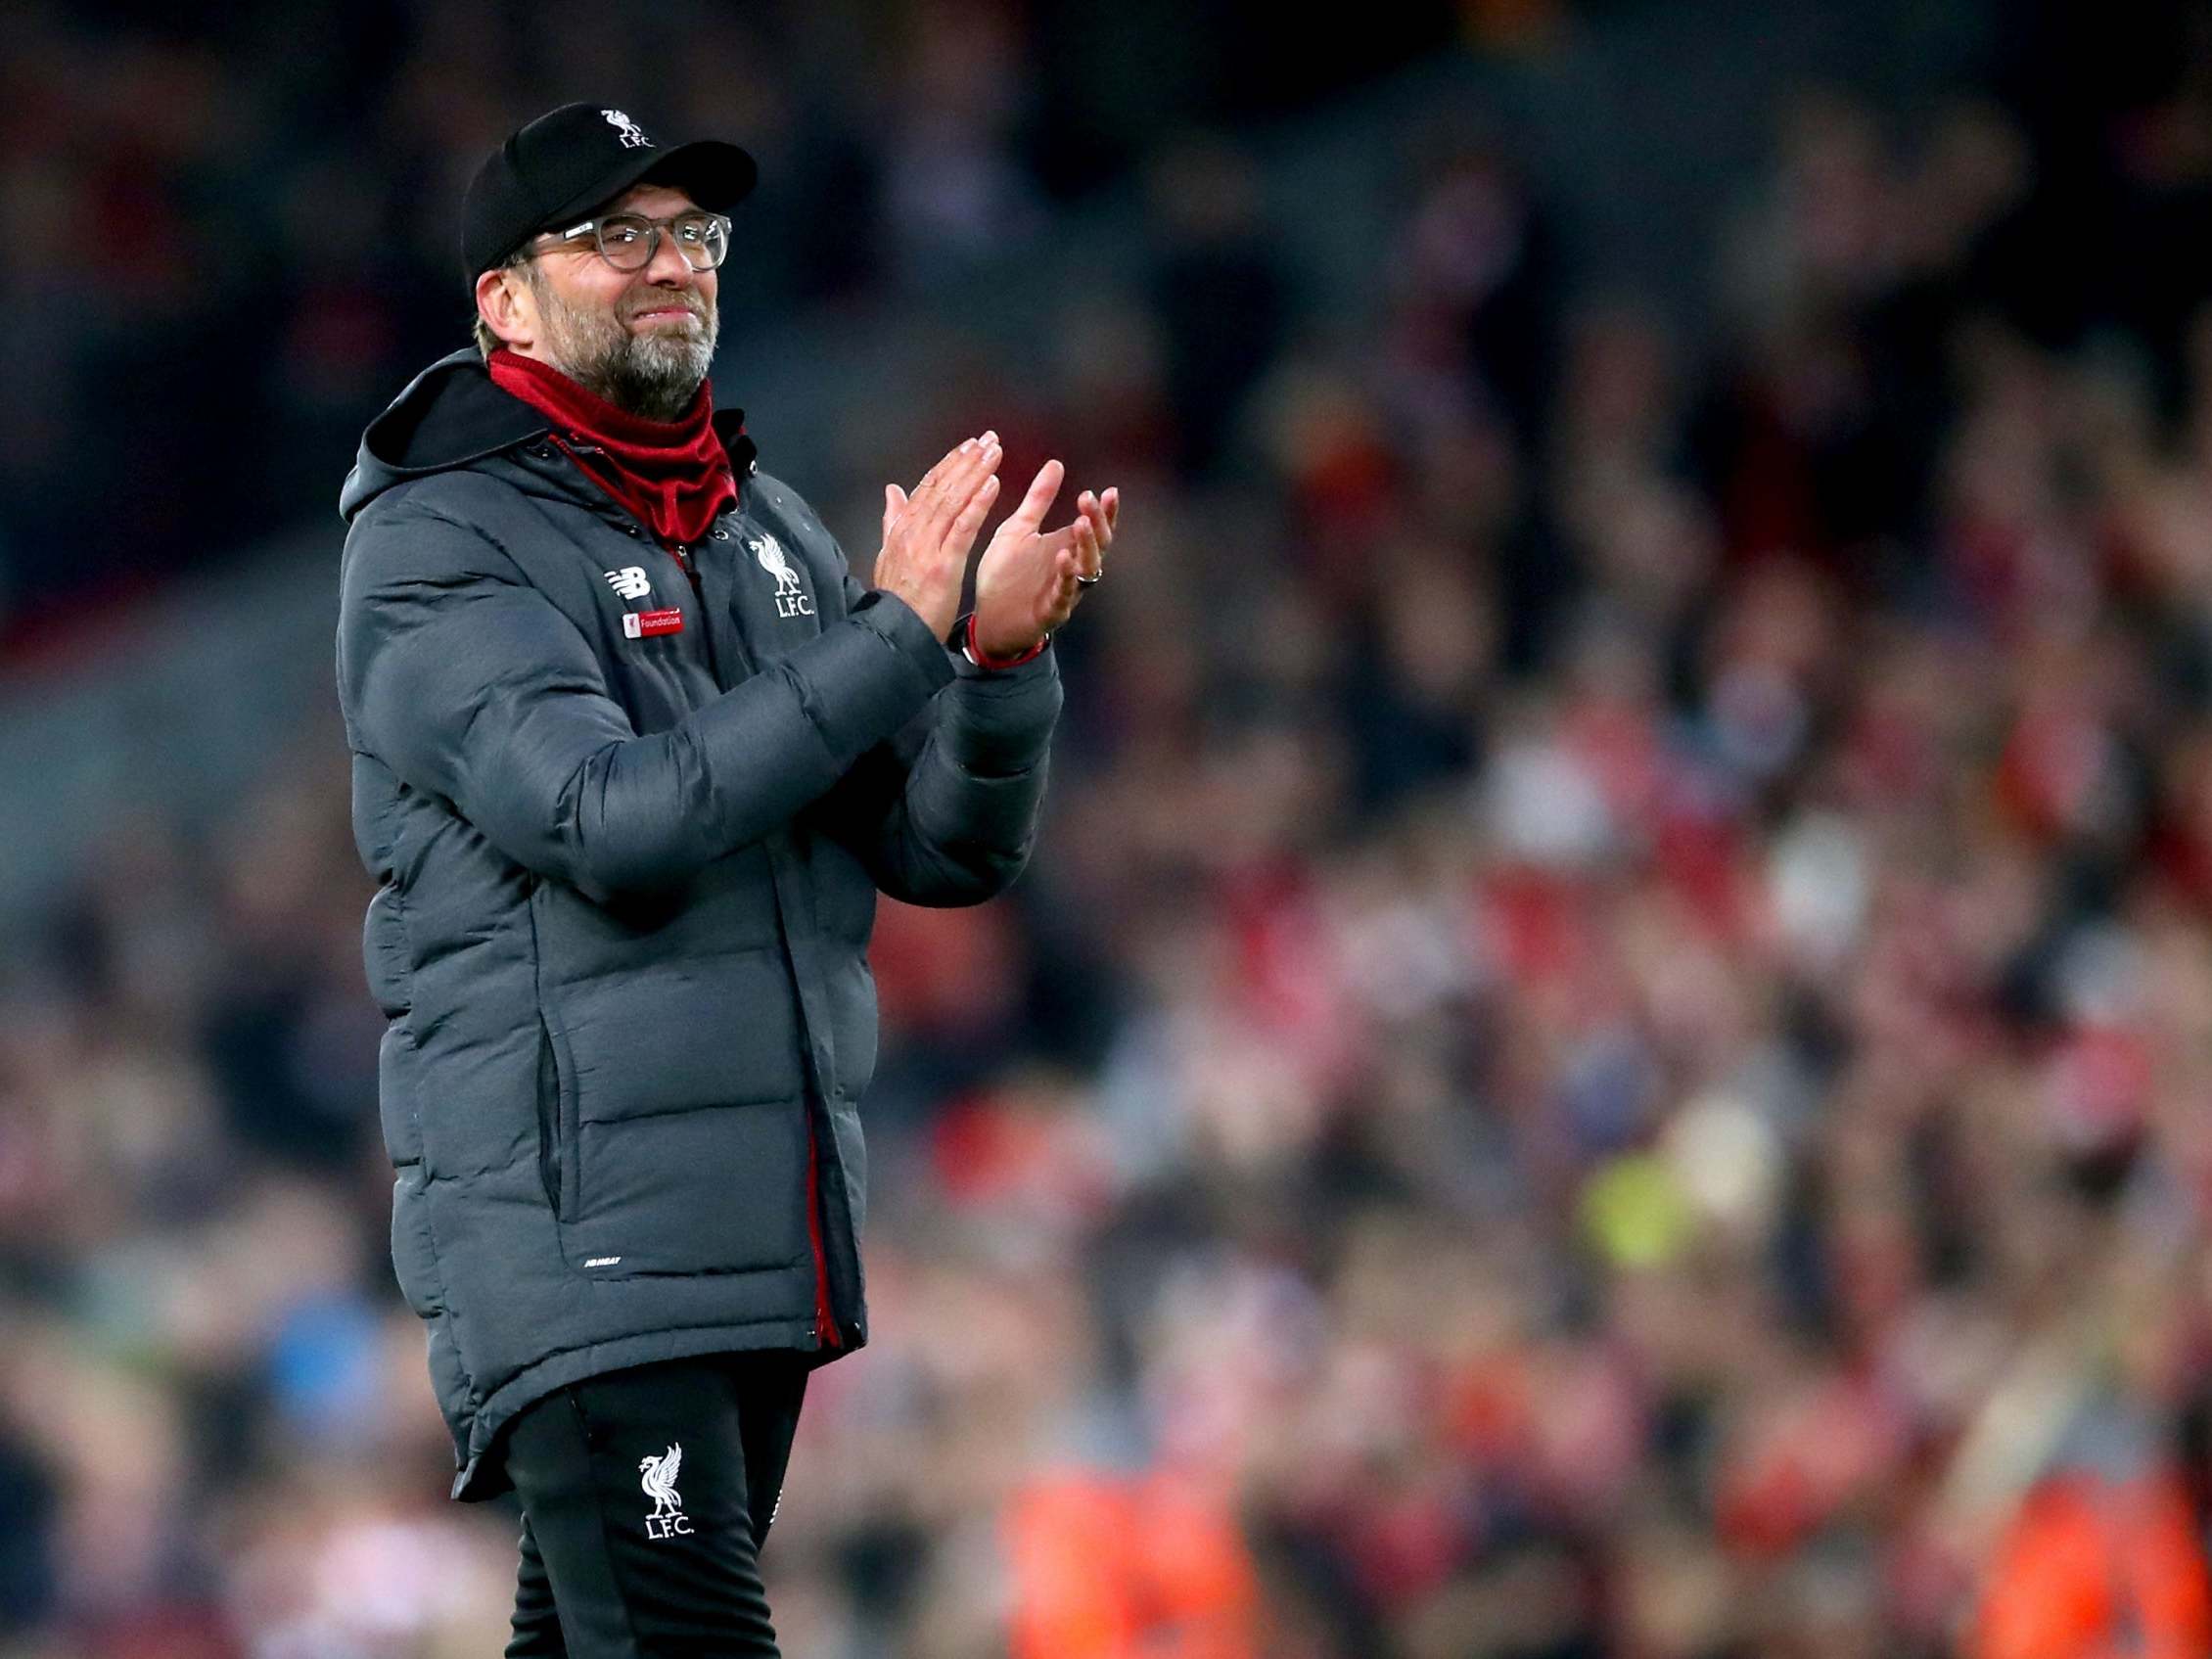 Jurgen Klopp has called on Liverpool to press on with their Premier League title charge in 2020